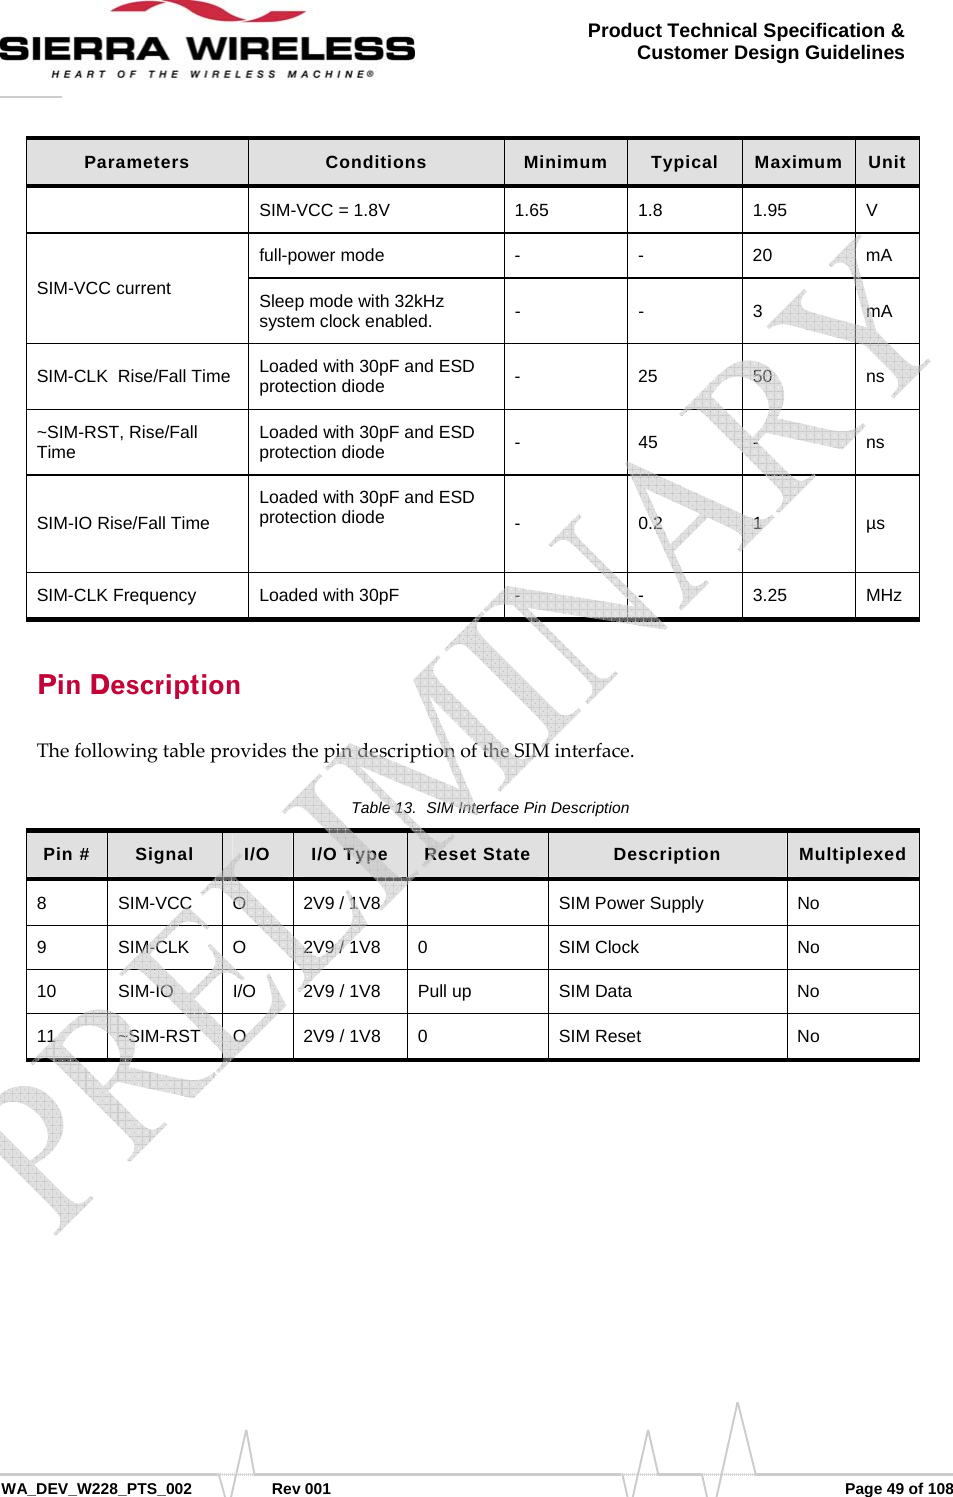      WA_DEV_W228_PTS_002 Rev 001  Page 49 of 108 Product Technical Specification &amp; Customer Design Guidelines Parameters  Conditions  Minimum  Typical  Maximum  Unit SIM-VCC = 1.8V  1.65  1.8  1.95  V SIM-VCC current full-power mode  -  -  20  mA Sleep mode with 32kHz system clock enabled.  - - 3 mA SIM-CLK  Rise/Fall Time  Loaded with 30pF and ESD protection diode  - 25 50 ns ~SIM-RST, Rise/Fall Time  Loaded with 30pF and ESD protection diode  - 45 - ns SIM-IO Rise/Fall Time Loaded with 30pF and ESD protection diode  - 0.2 1 µs SIM-CLK Frequency  Loaded with 30pF  -  -  3.25  MHz Pin Description ThefollowingtableprovidesthepindescriptionoftheSIMinterface.Table 13.  SIM Interface Pin Description Pin #  Signal  I/O  I/O Type  Reset State  Description  Multiplexed 8  SIM-VCC  O  2V9 / 1V8    SIM Power Supply  No 9 SIM-CLK O 2V9 / 1V8 0  SIM Clock  No 10 SIM-IO I/O 2V9 / 1V8 Pull up  SIM Data  No 11 ~SIM-RST O 2V9 / 1V8 0  SIM Reset  No    